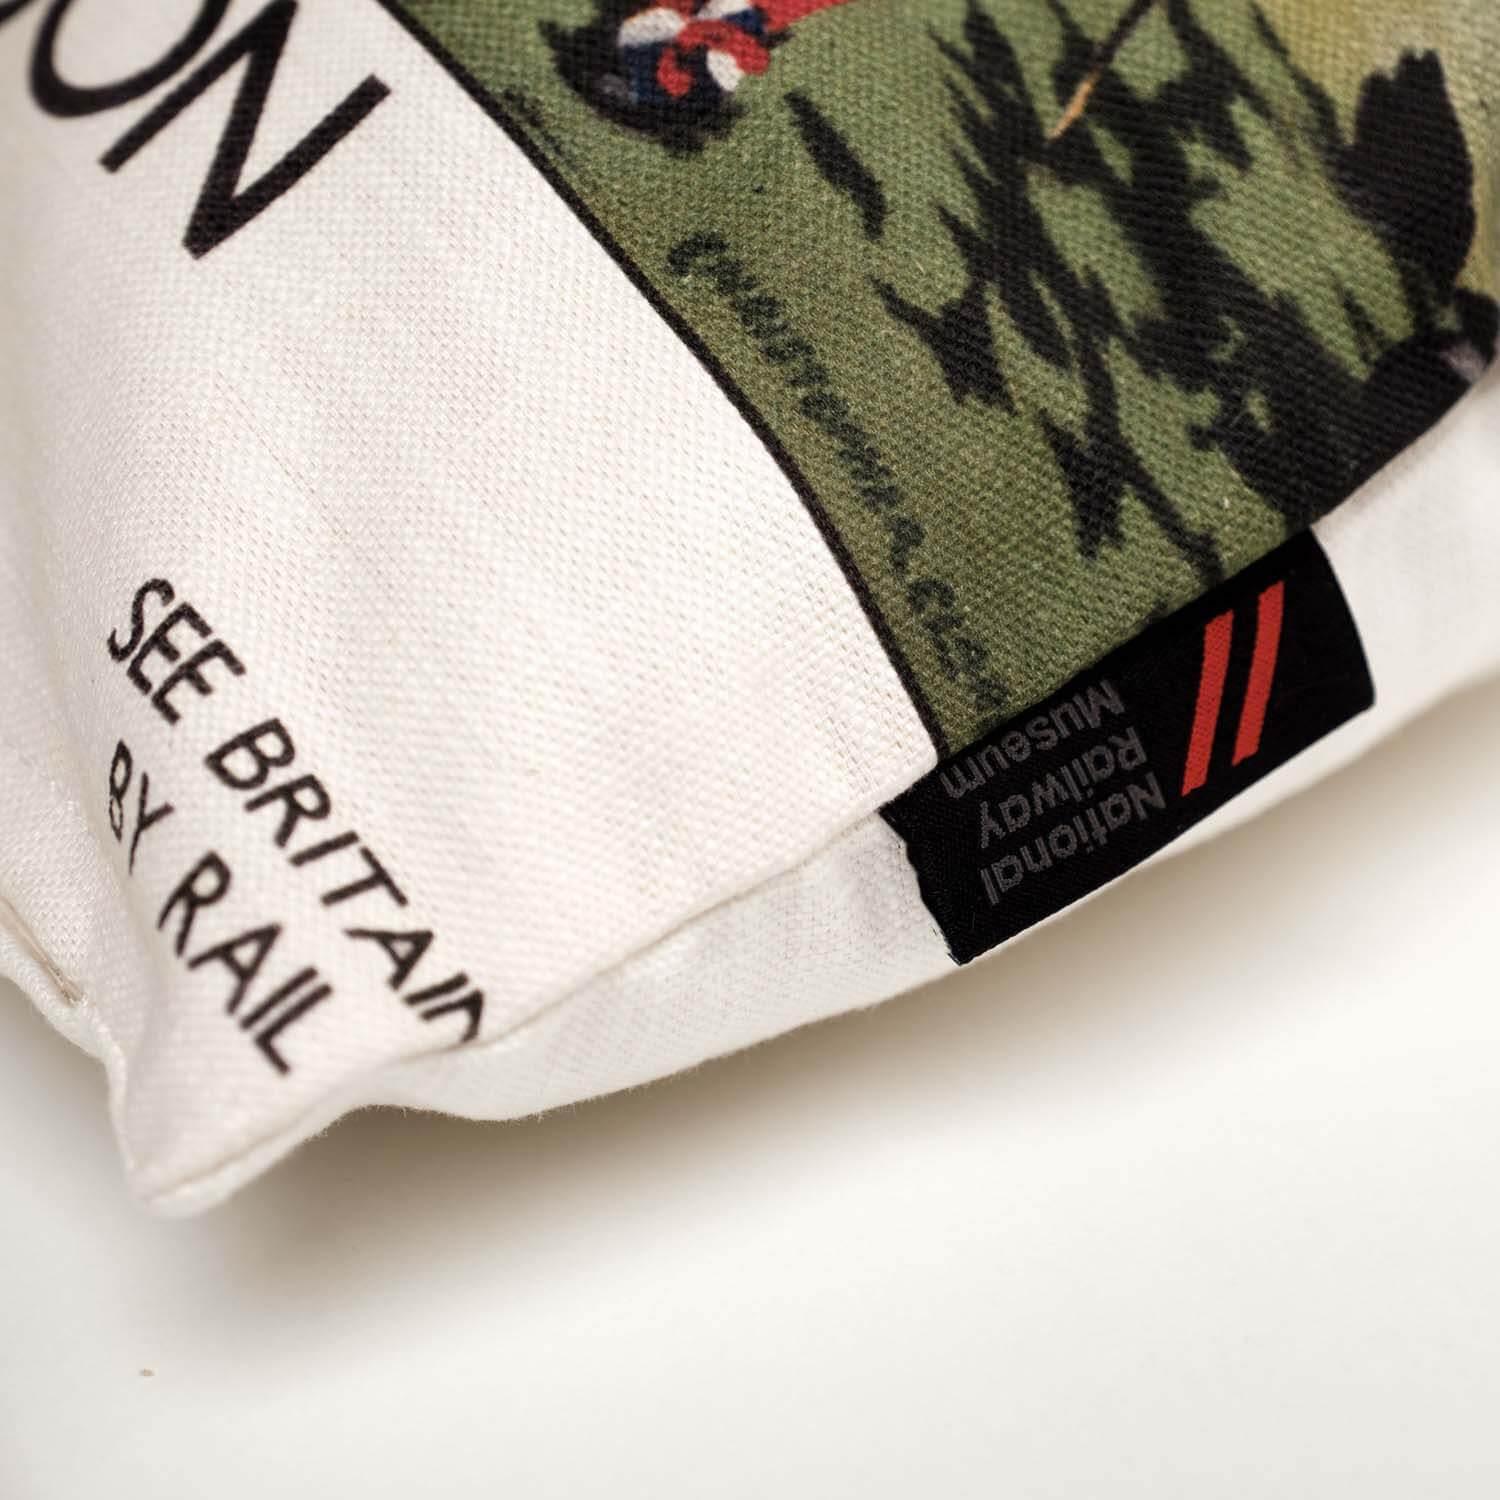 Western Highlands by East Coast Route - National Railway Museum Cushion - Handmade Cushions UK - WeLoveCushions